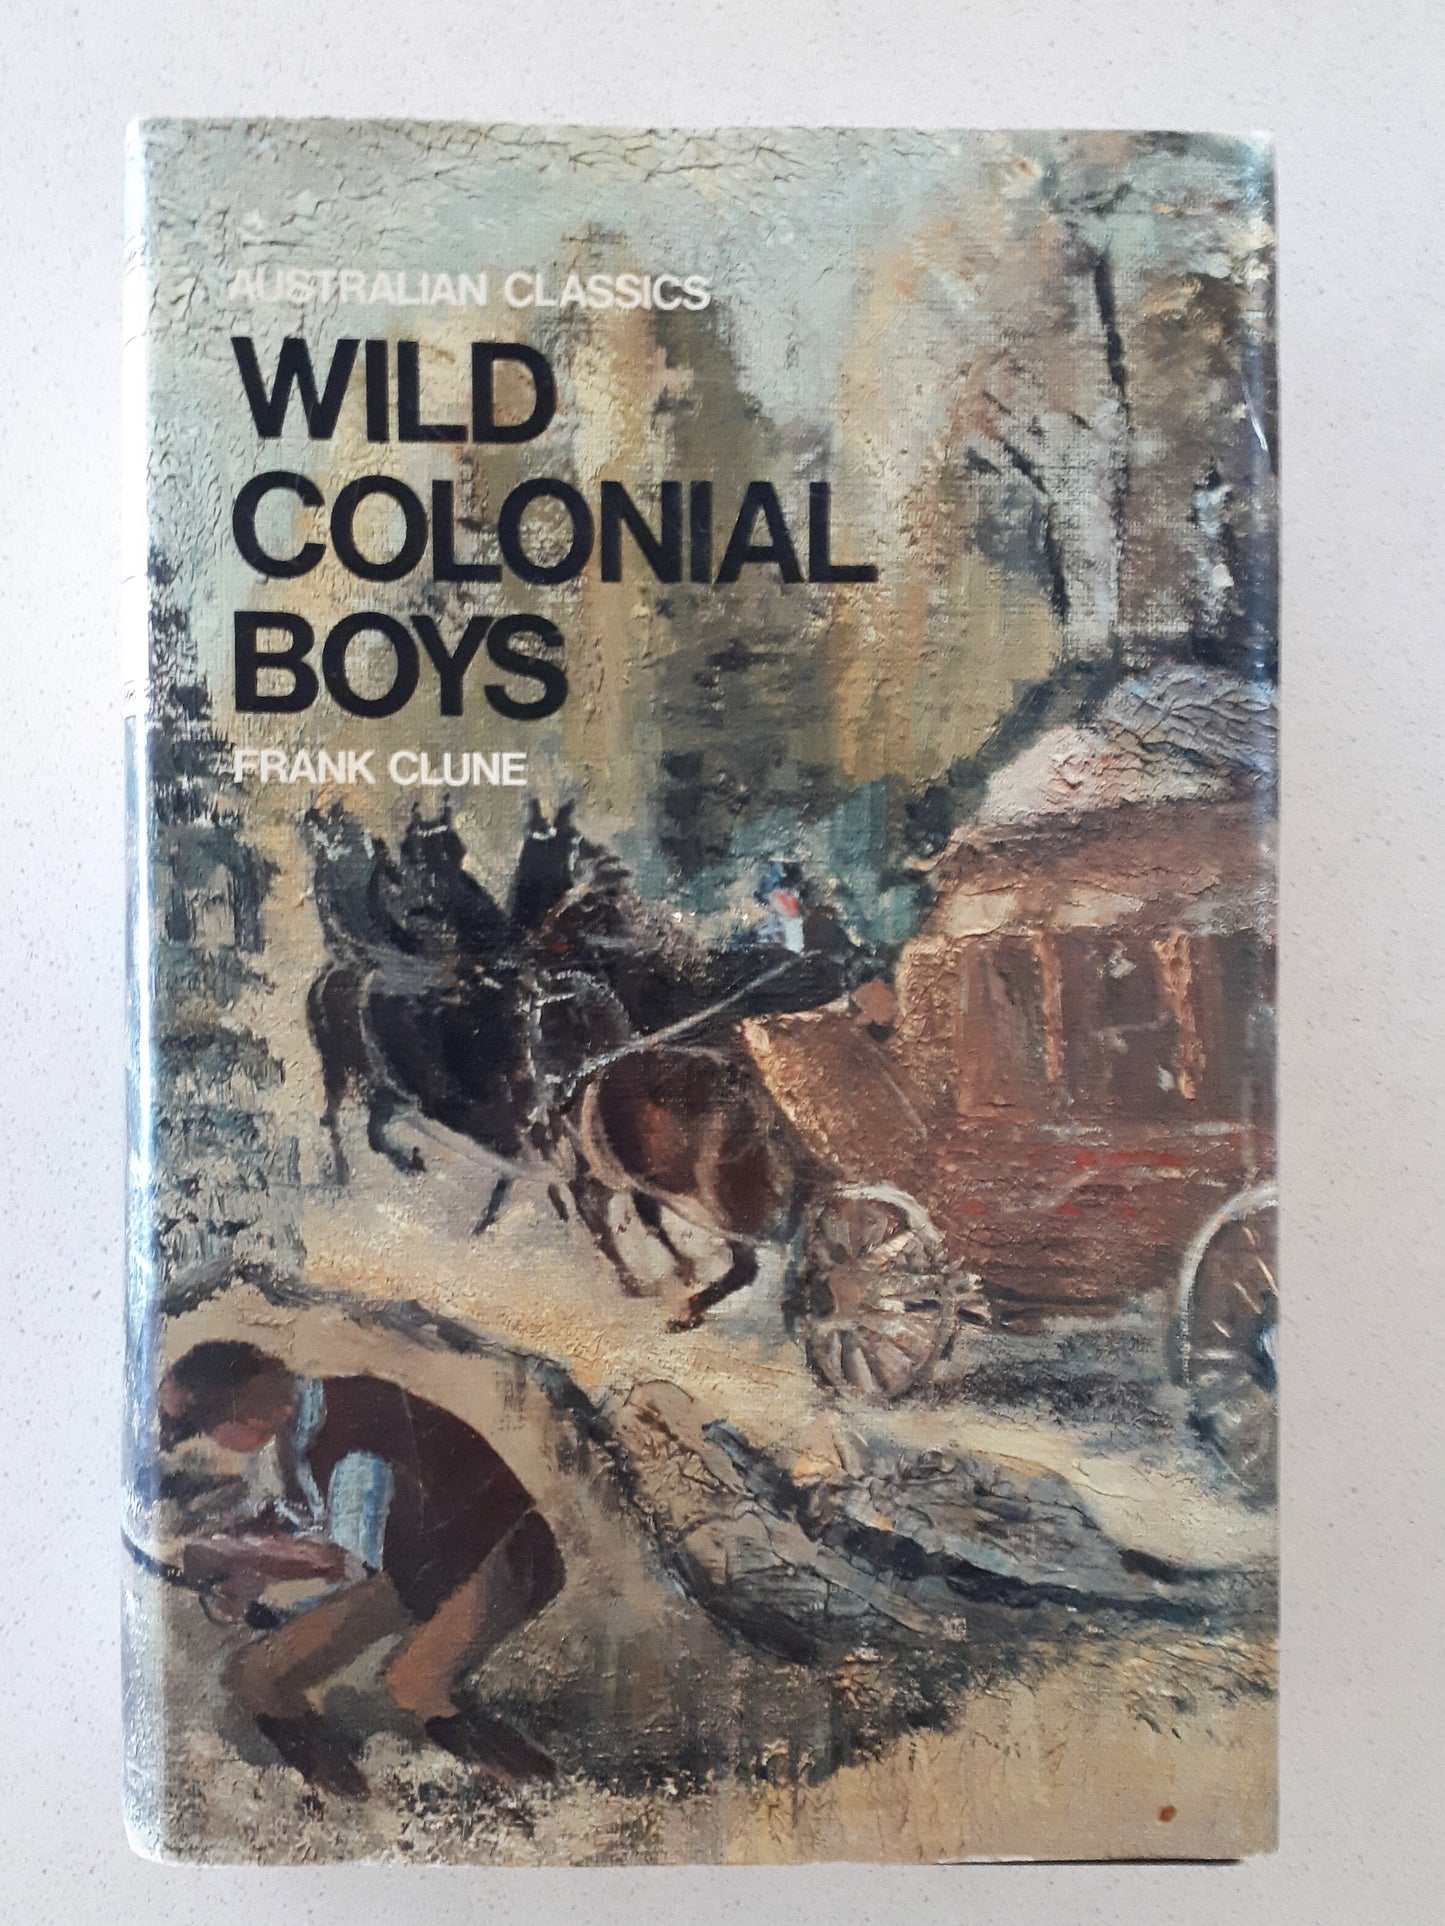 Wild Colonial Boys by Frank Clune